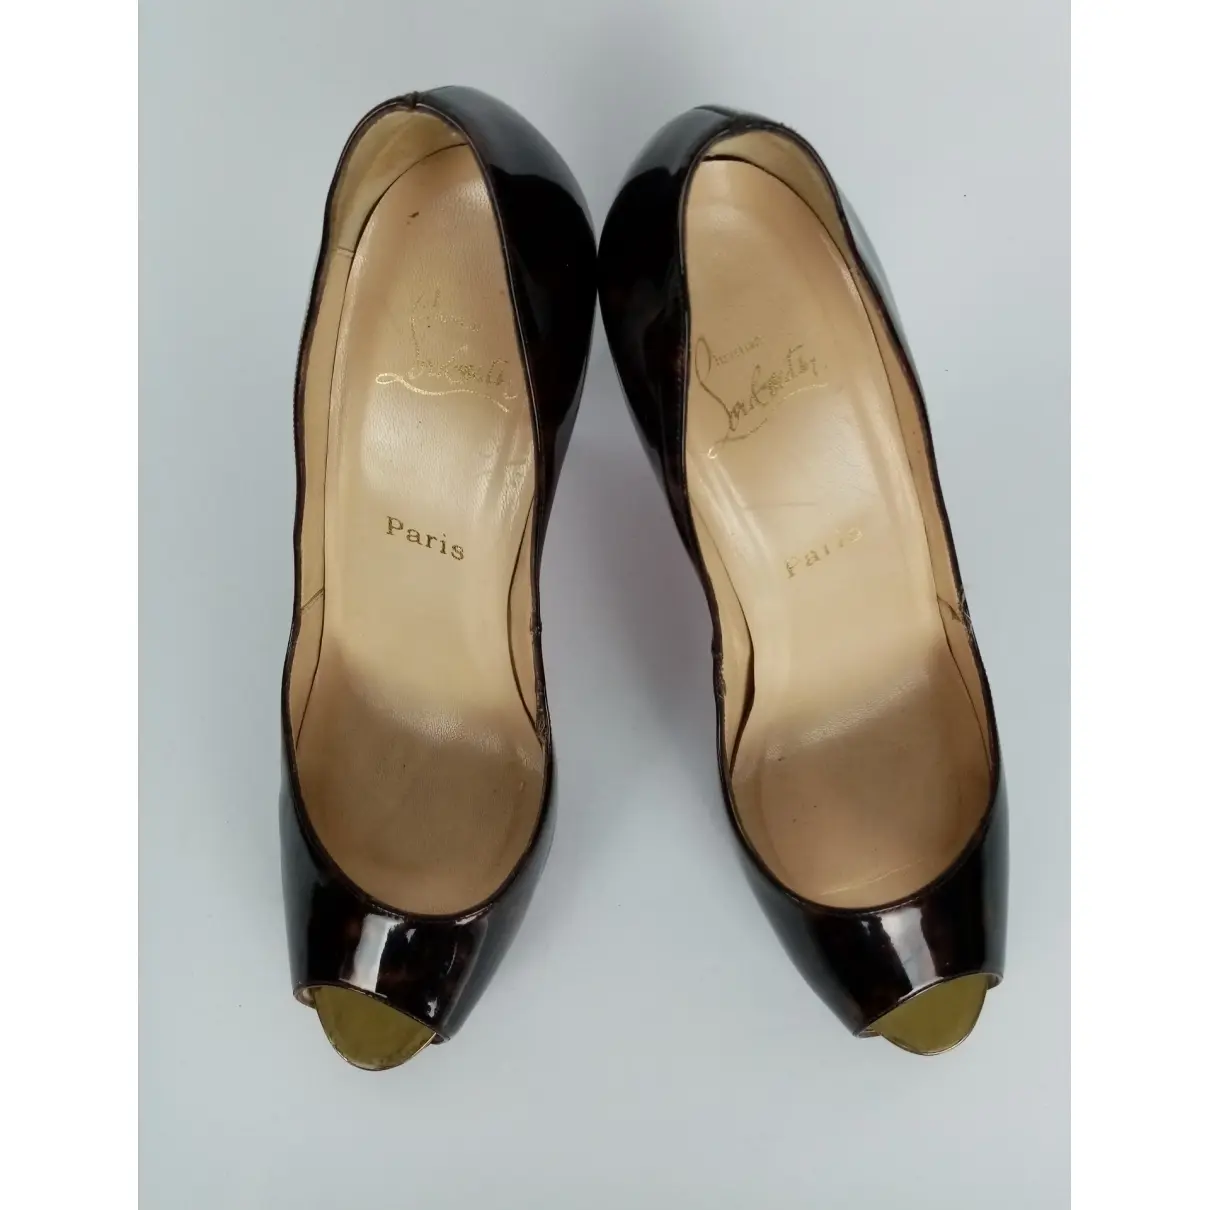 Christian Louboutin Lady Peep patent leather heels for sale - Vintage